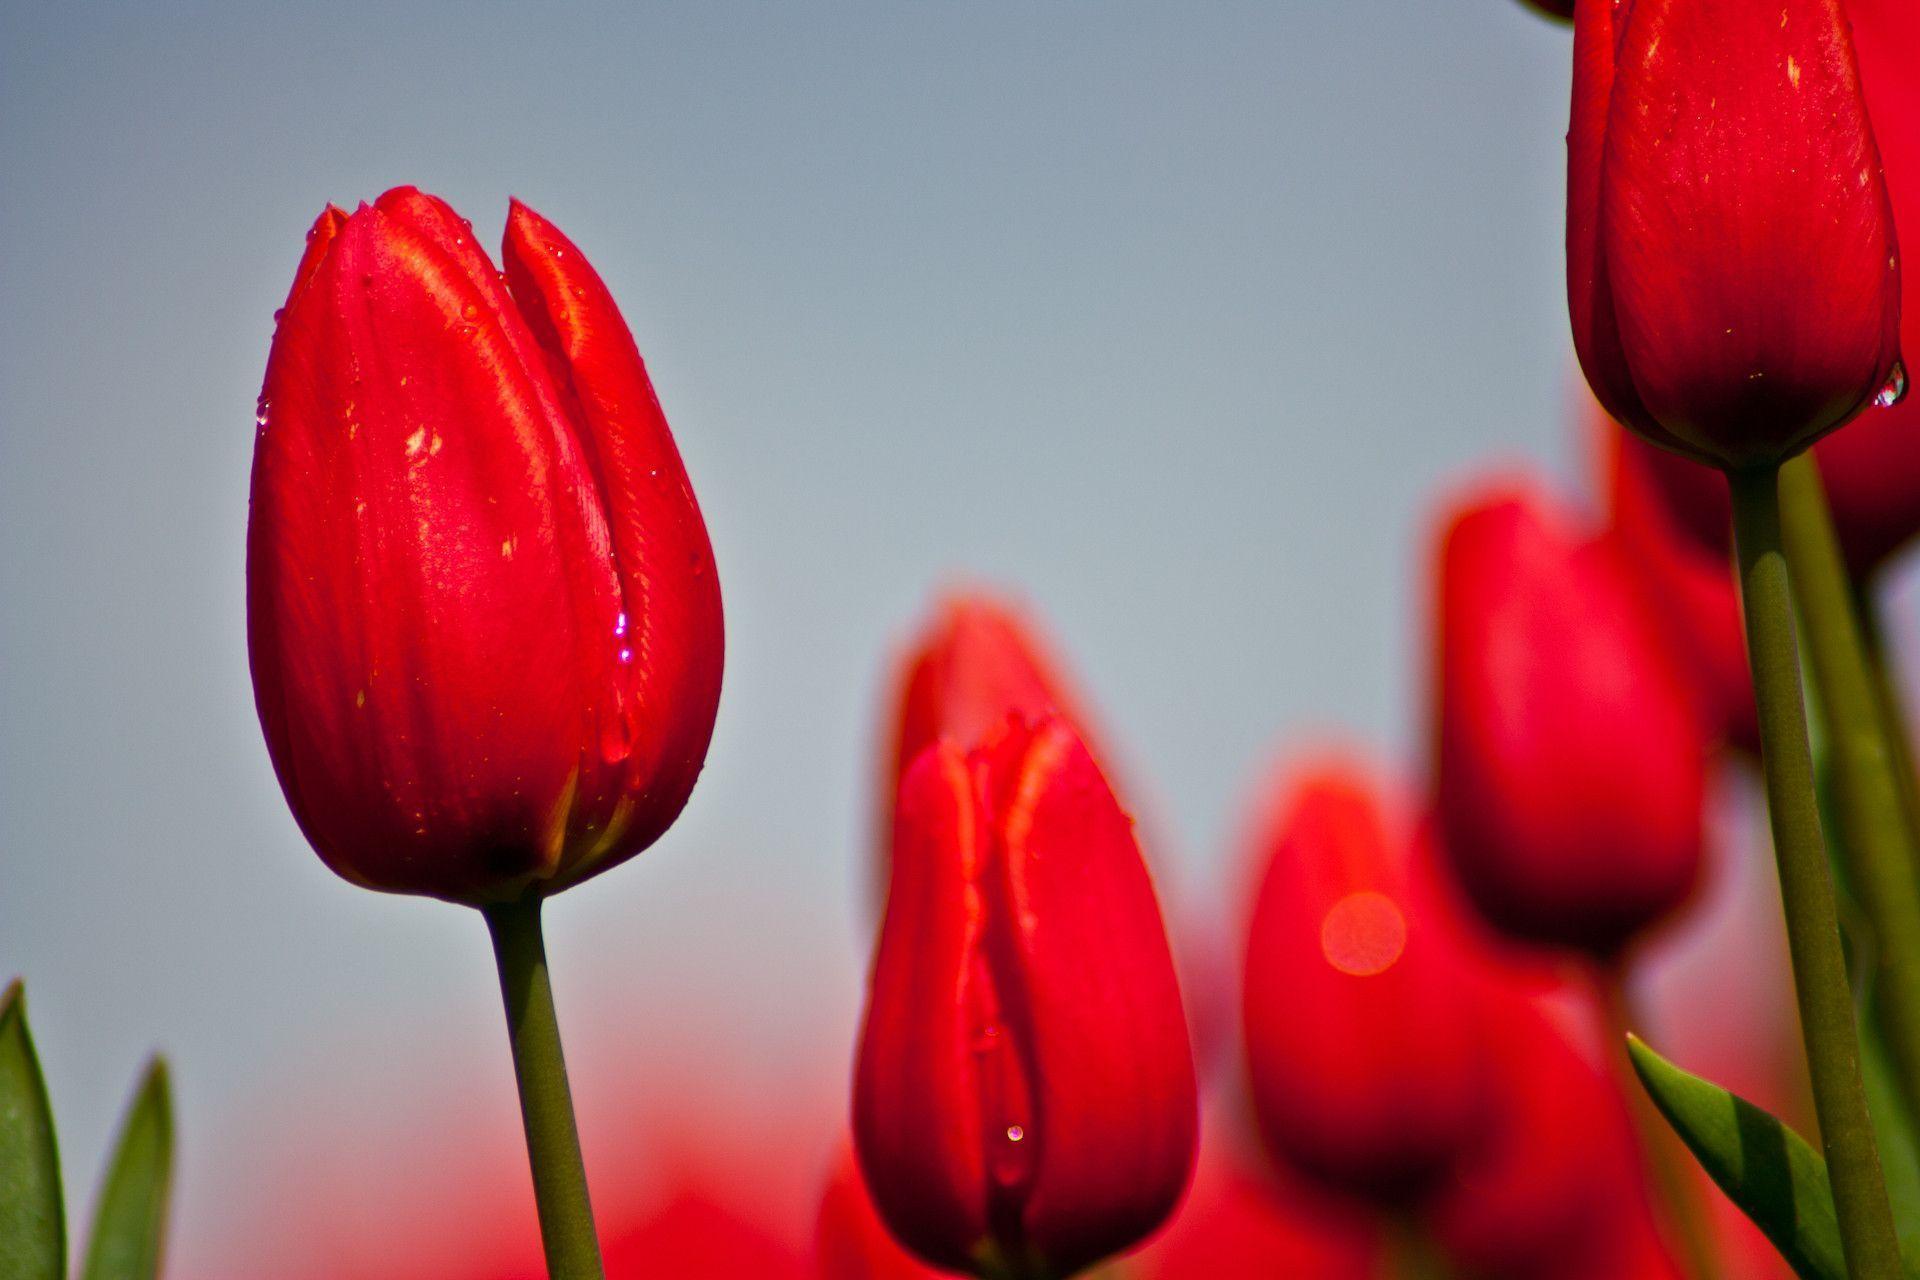 Red Tulips Wallpaper 19870 1920x1280 px